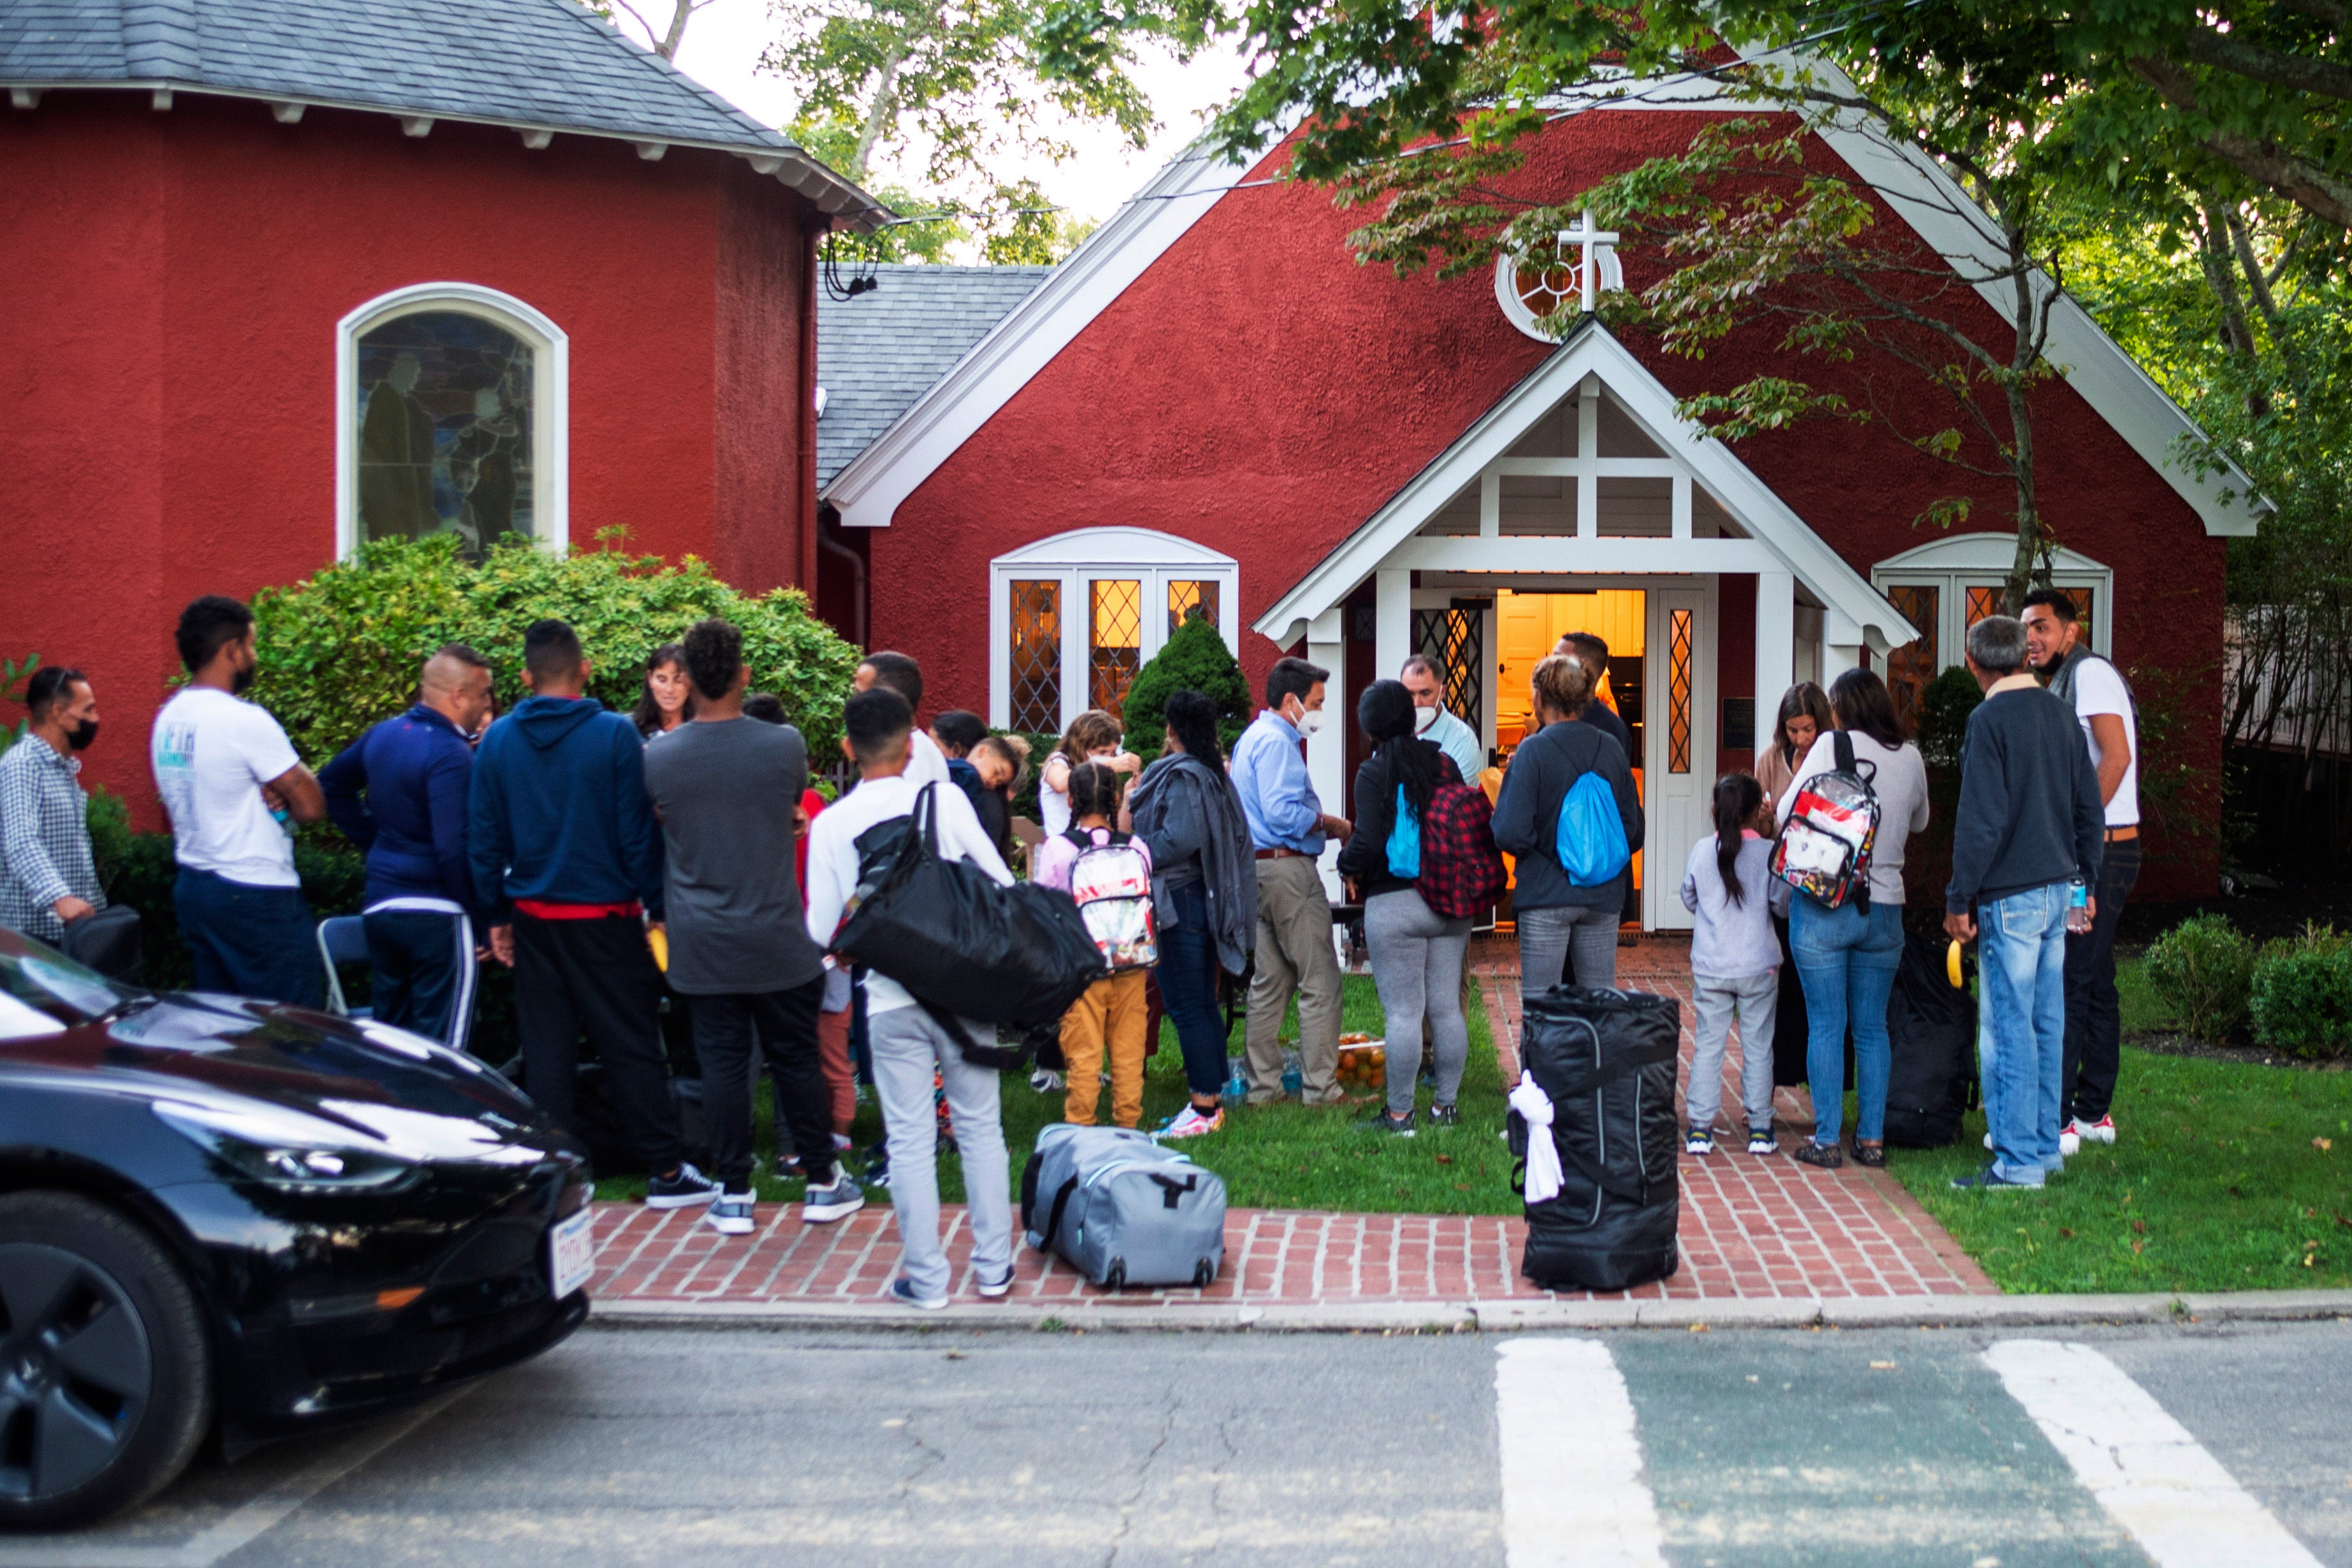 A group of migrants gather outside Martha’s Vineyard’s St Andrews Episcopal Church, which received an ‘outporing’ of support from the island